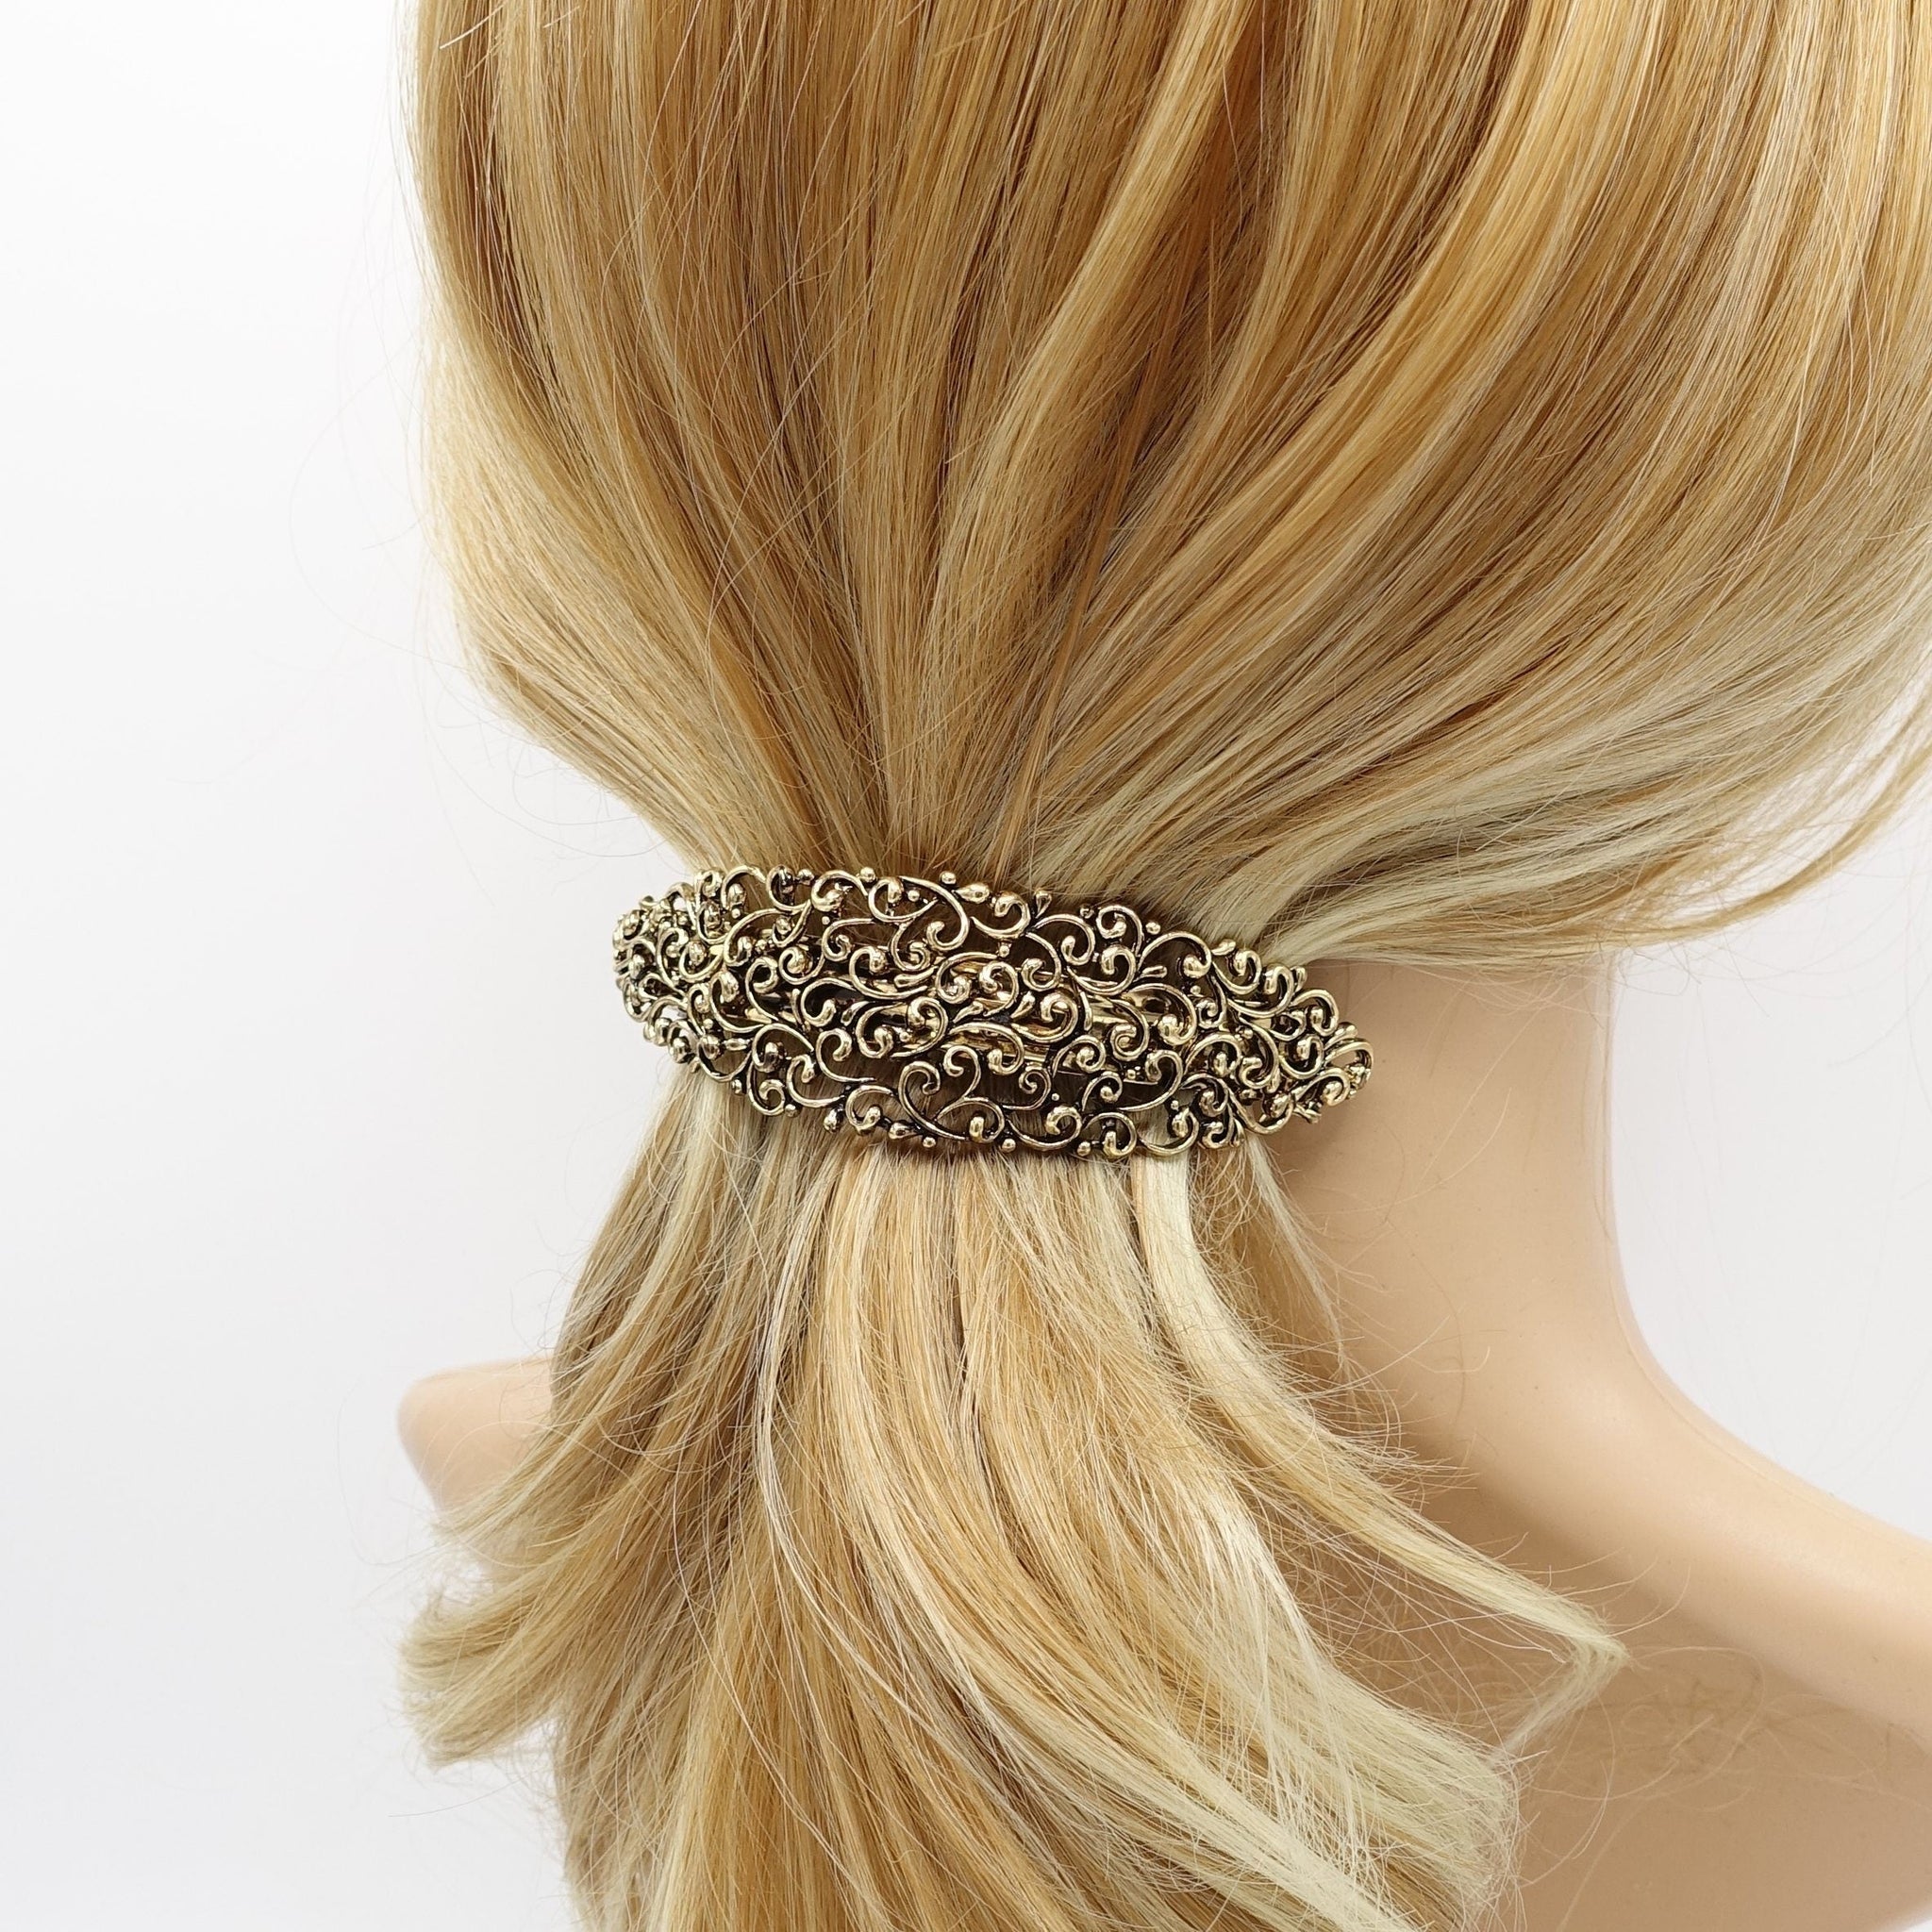 veryshine.com Barrette (Bow) Pointed gold steel hair barrette baroque pattern flower leaves embellished antique style french hair barrette